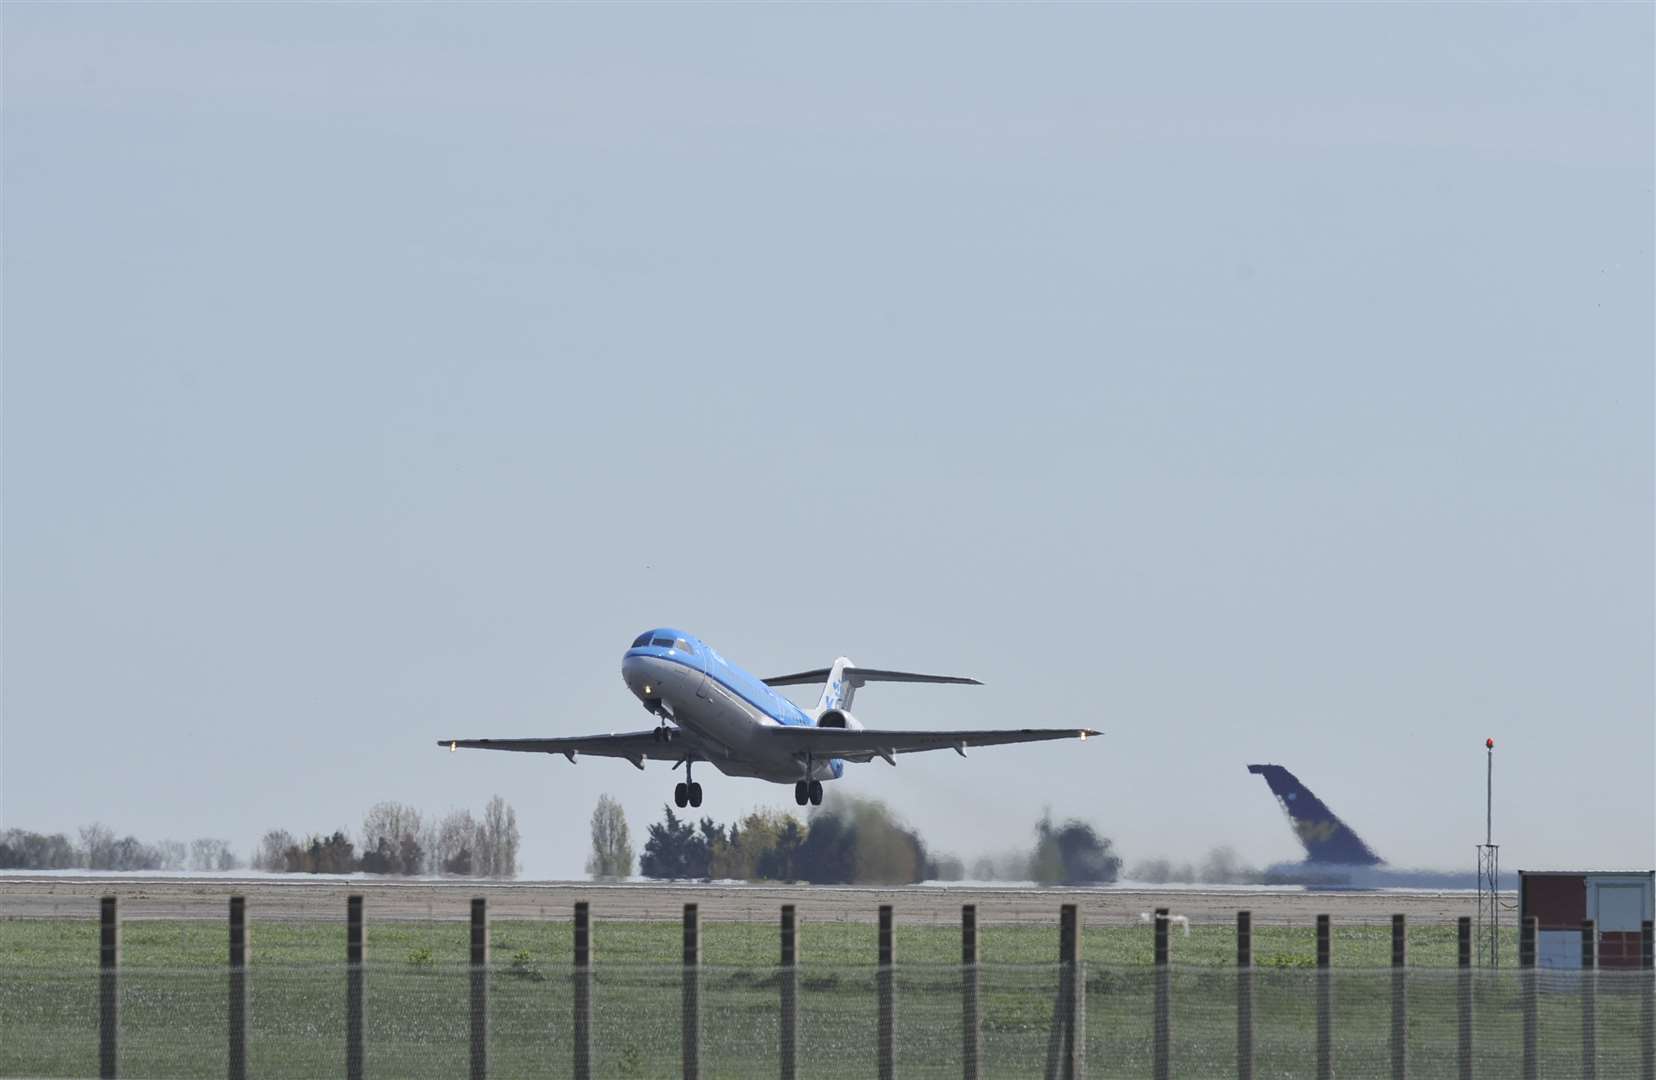 The last KLM flight takes off from Manston in 2014. Picture: Tony Flashman